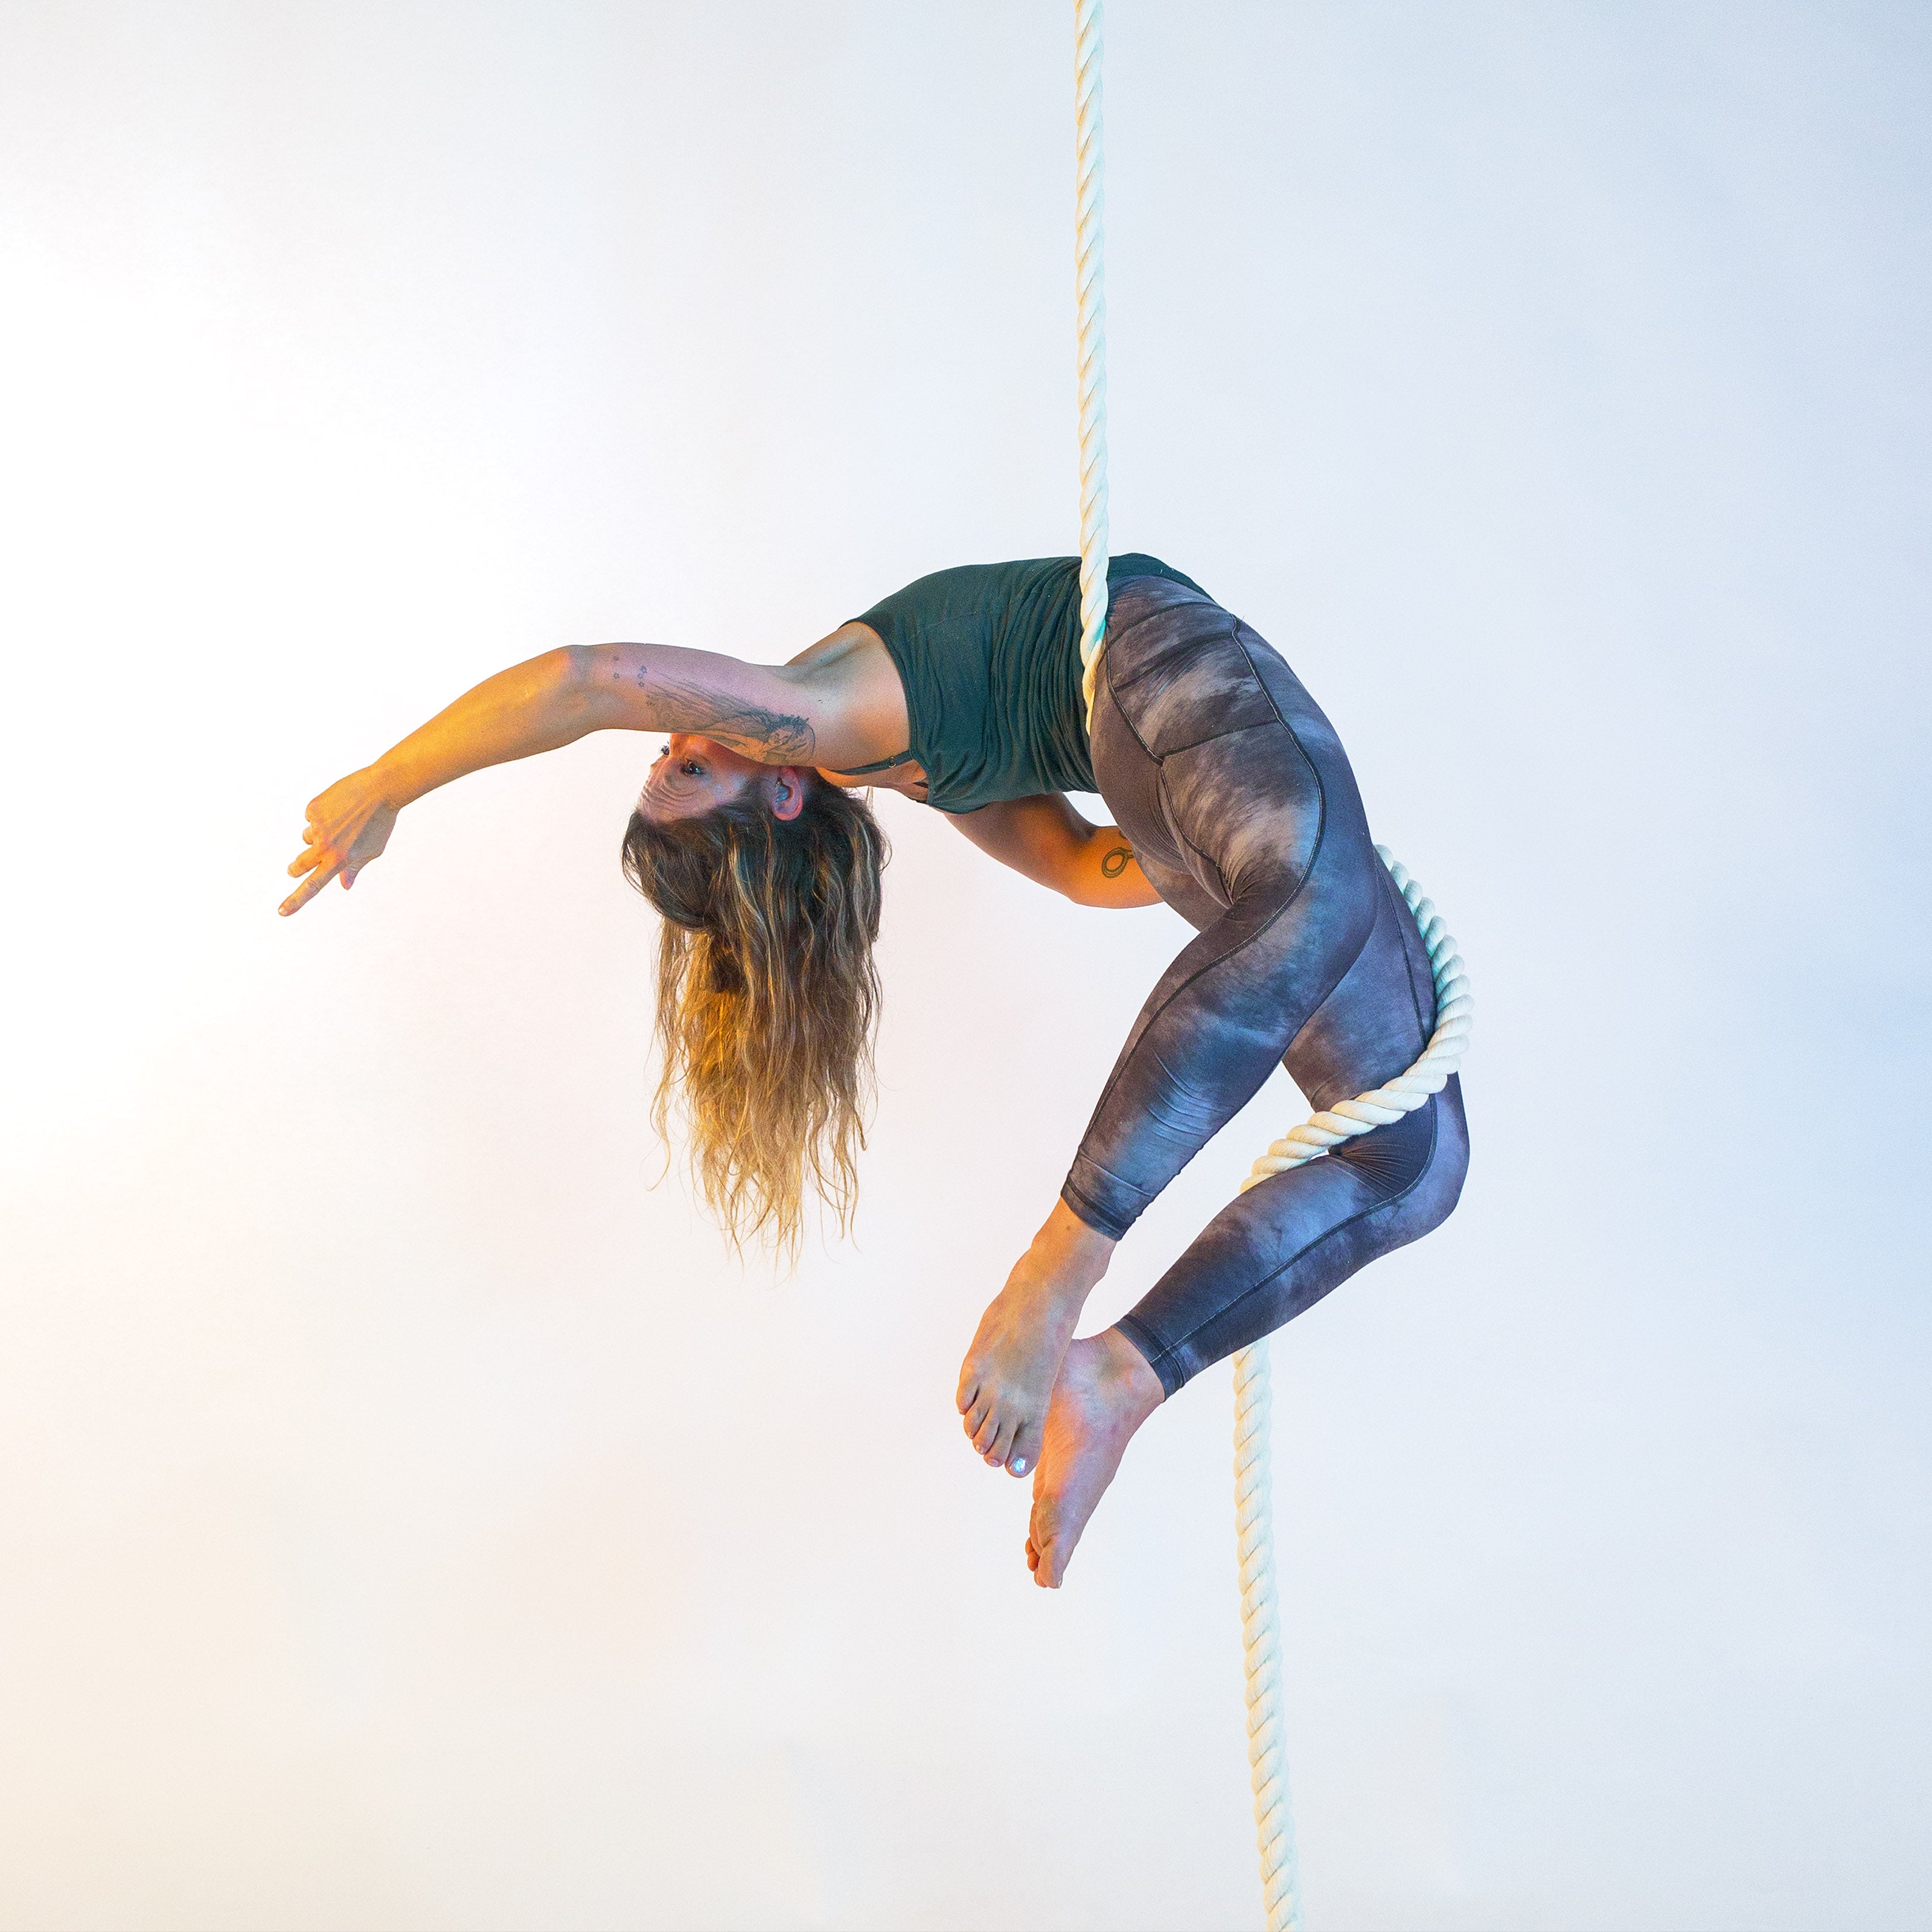 image of a performers in a back balance on a white 3-ply rope